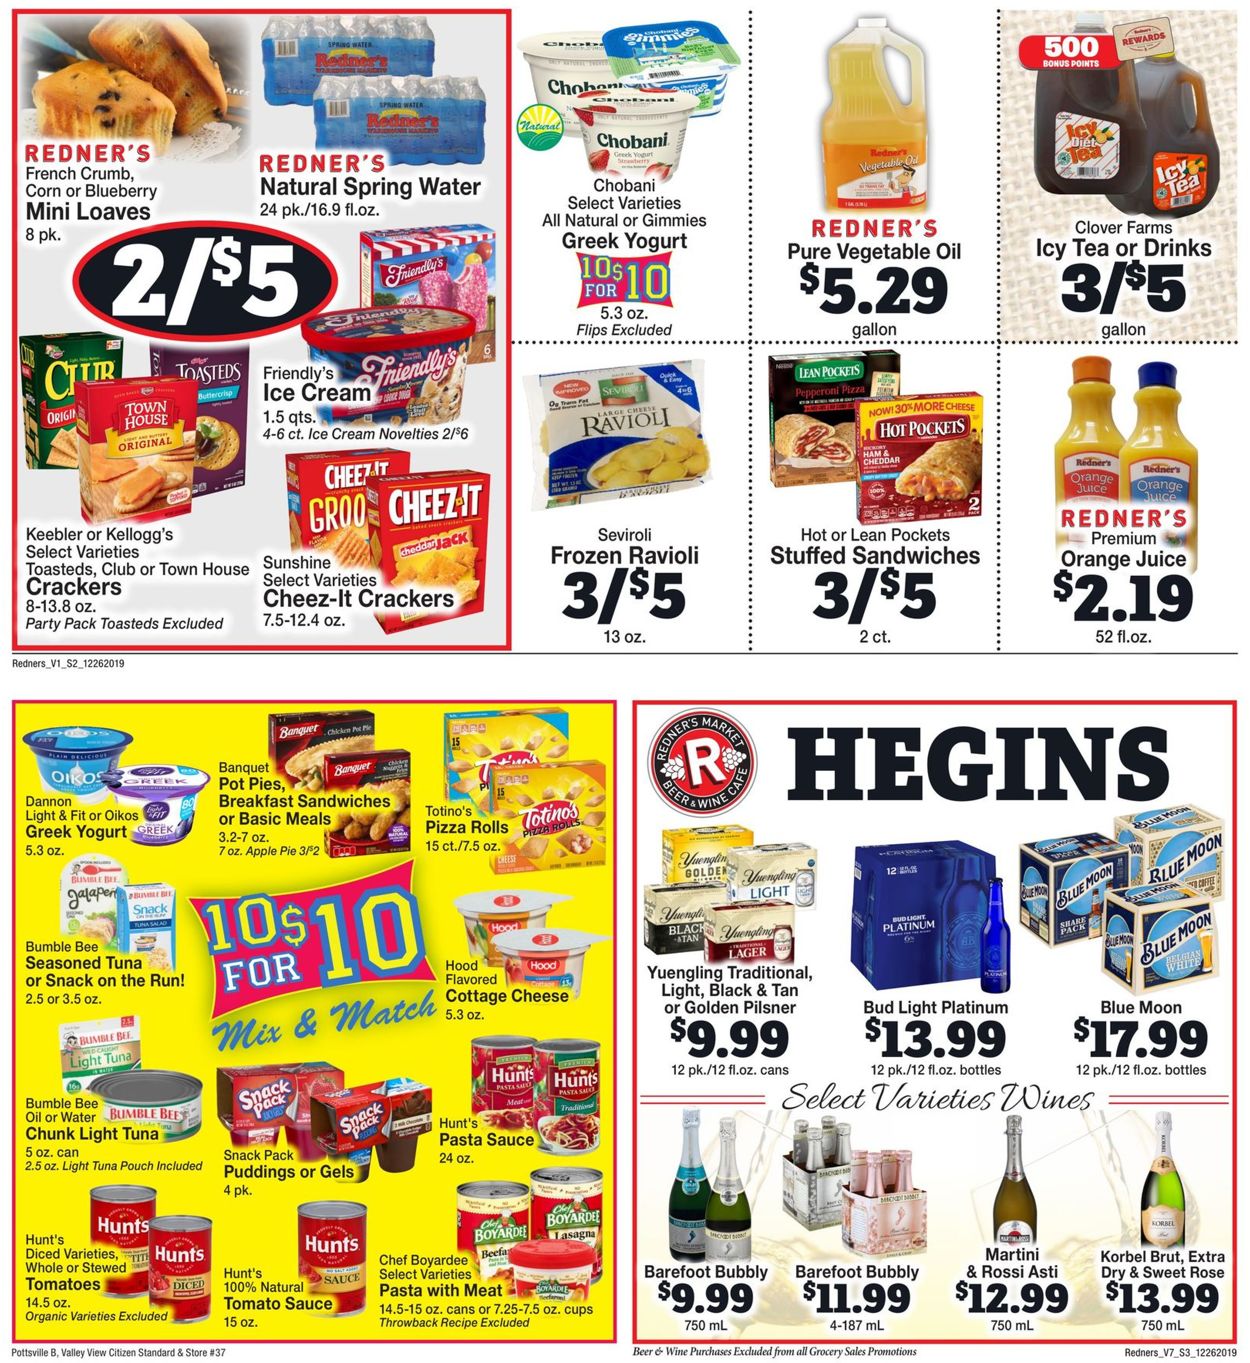 Catalogue Redner’s Warehouse Market - New Year's Ad 2019/2020 from 12/26/2019